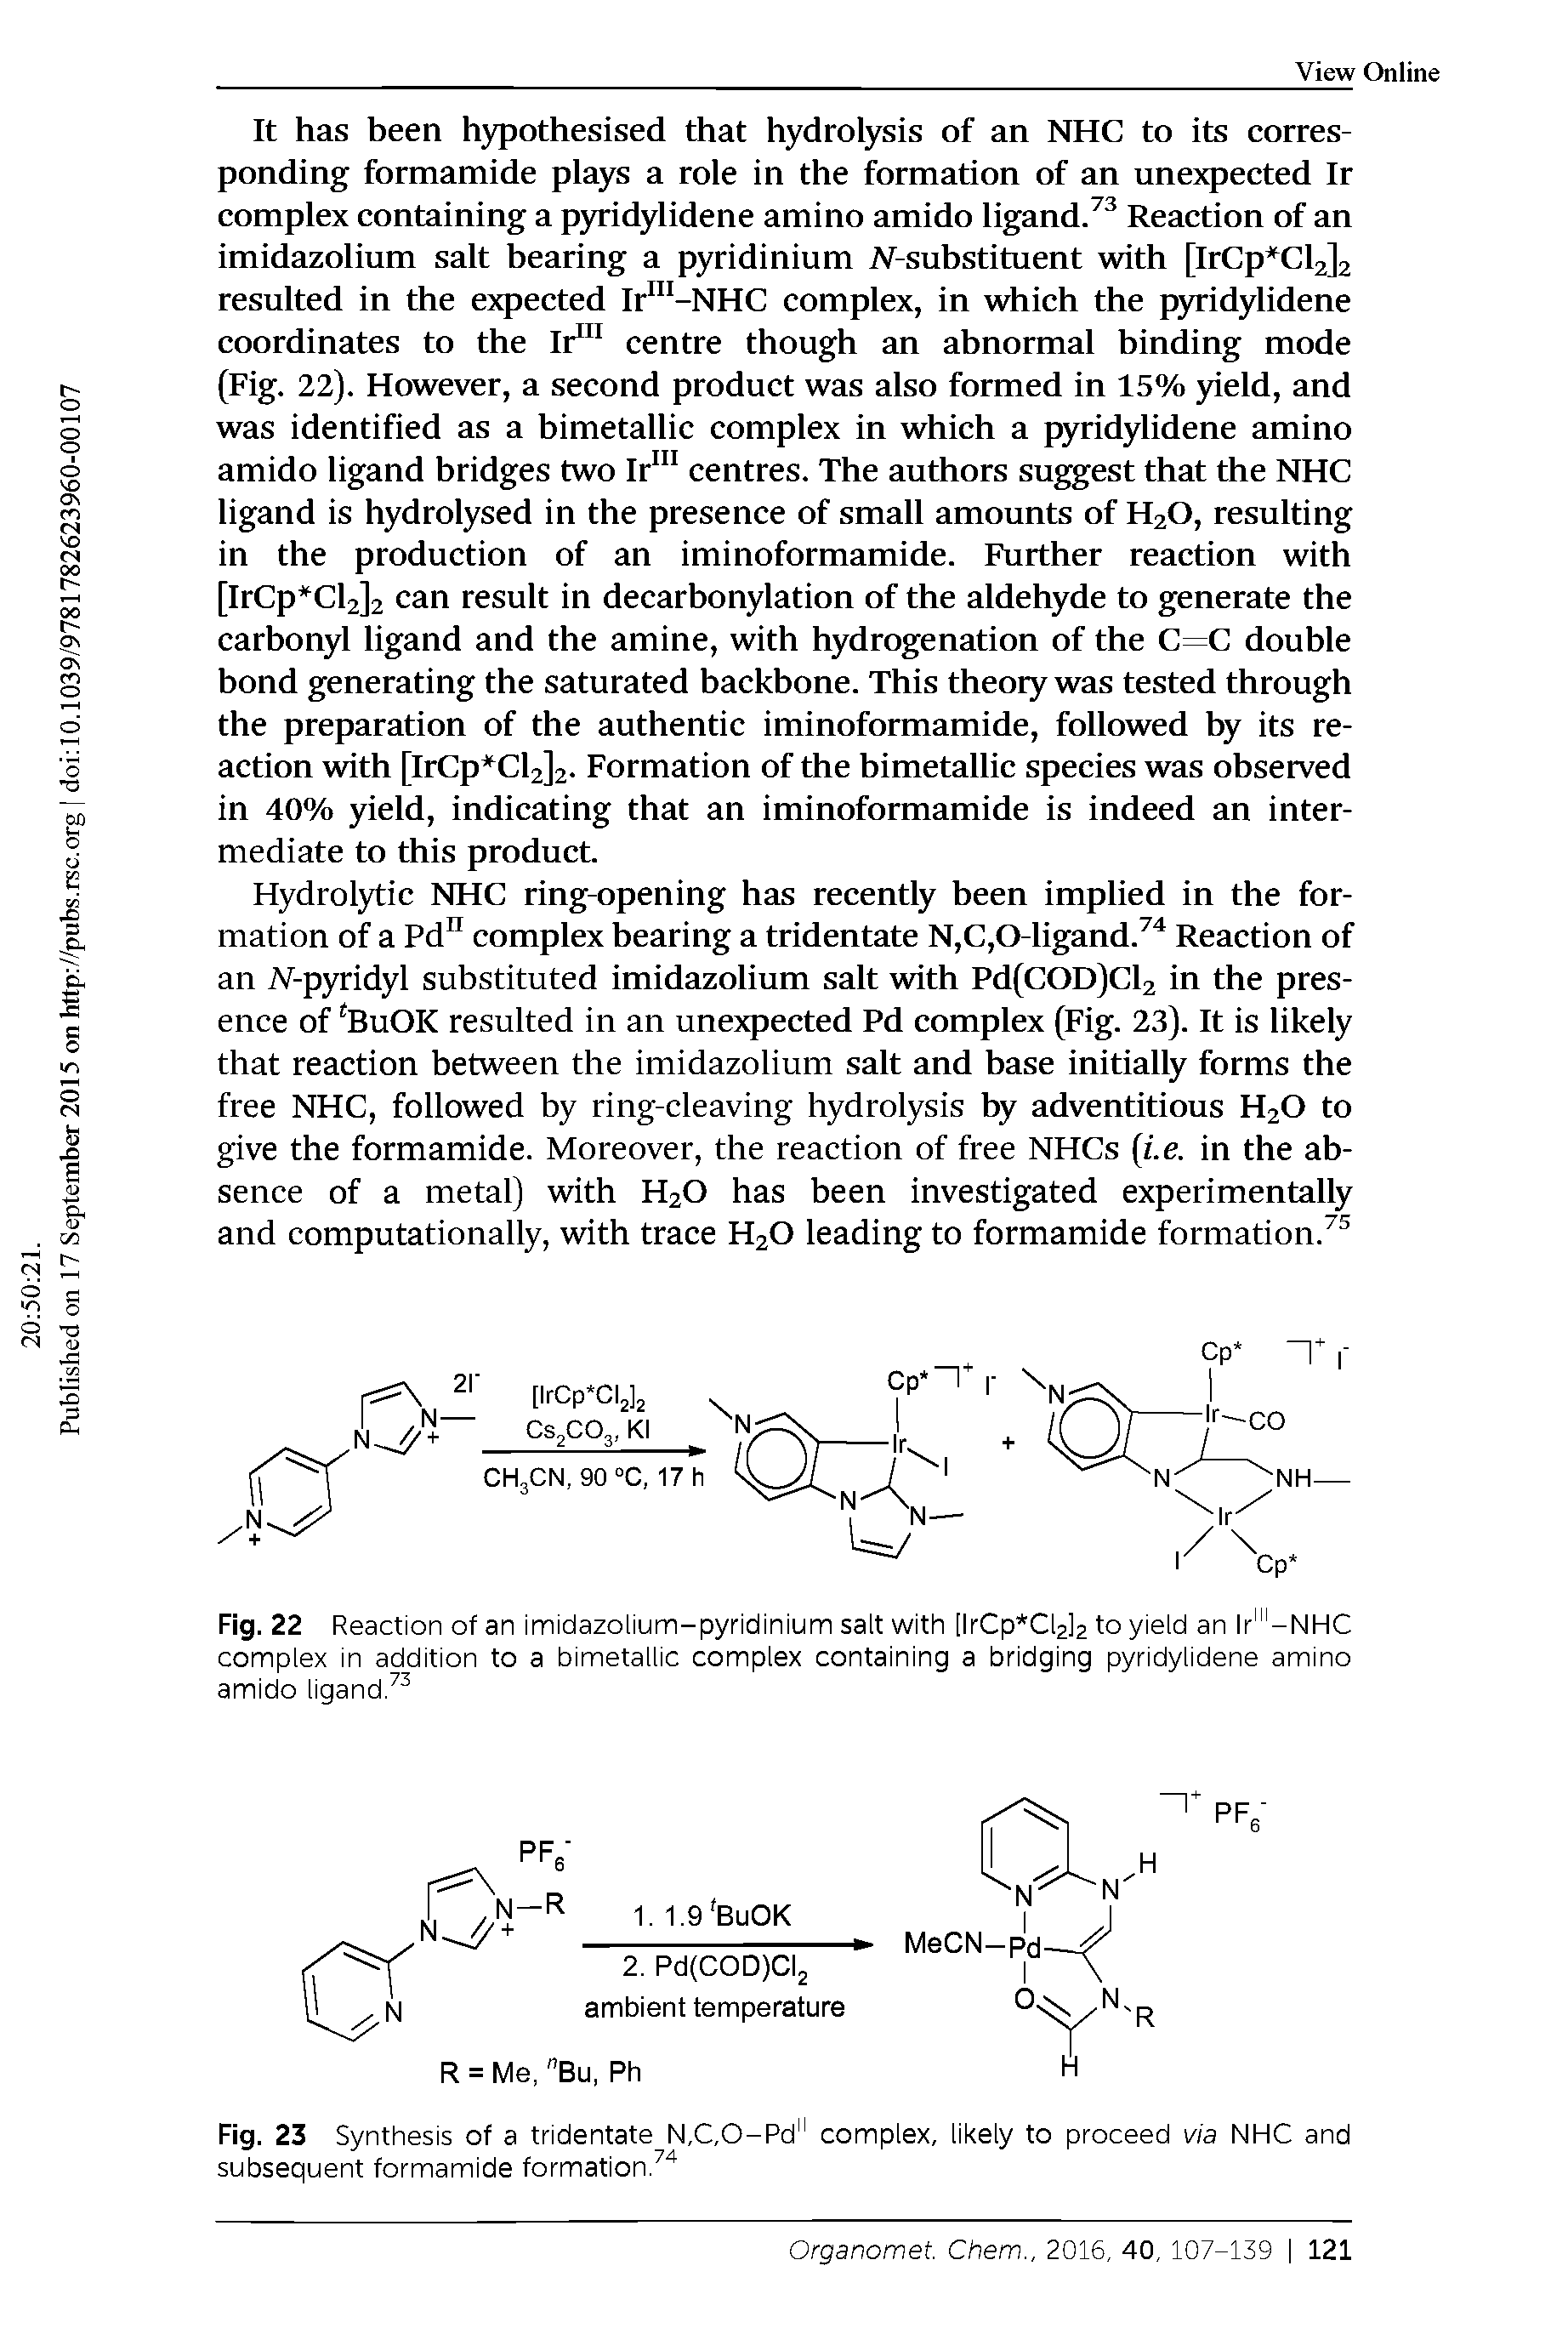 Fig. 23 Synthesis of a tridentate N,C,0-Pd" complex, likely to proceed via NHC and subsequent formamide formation.